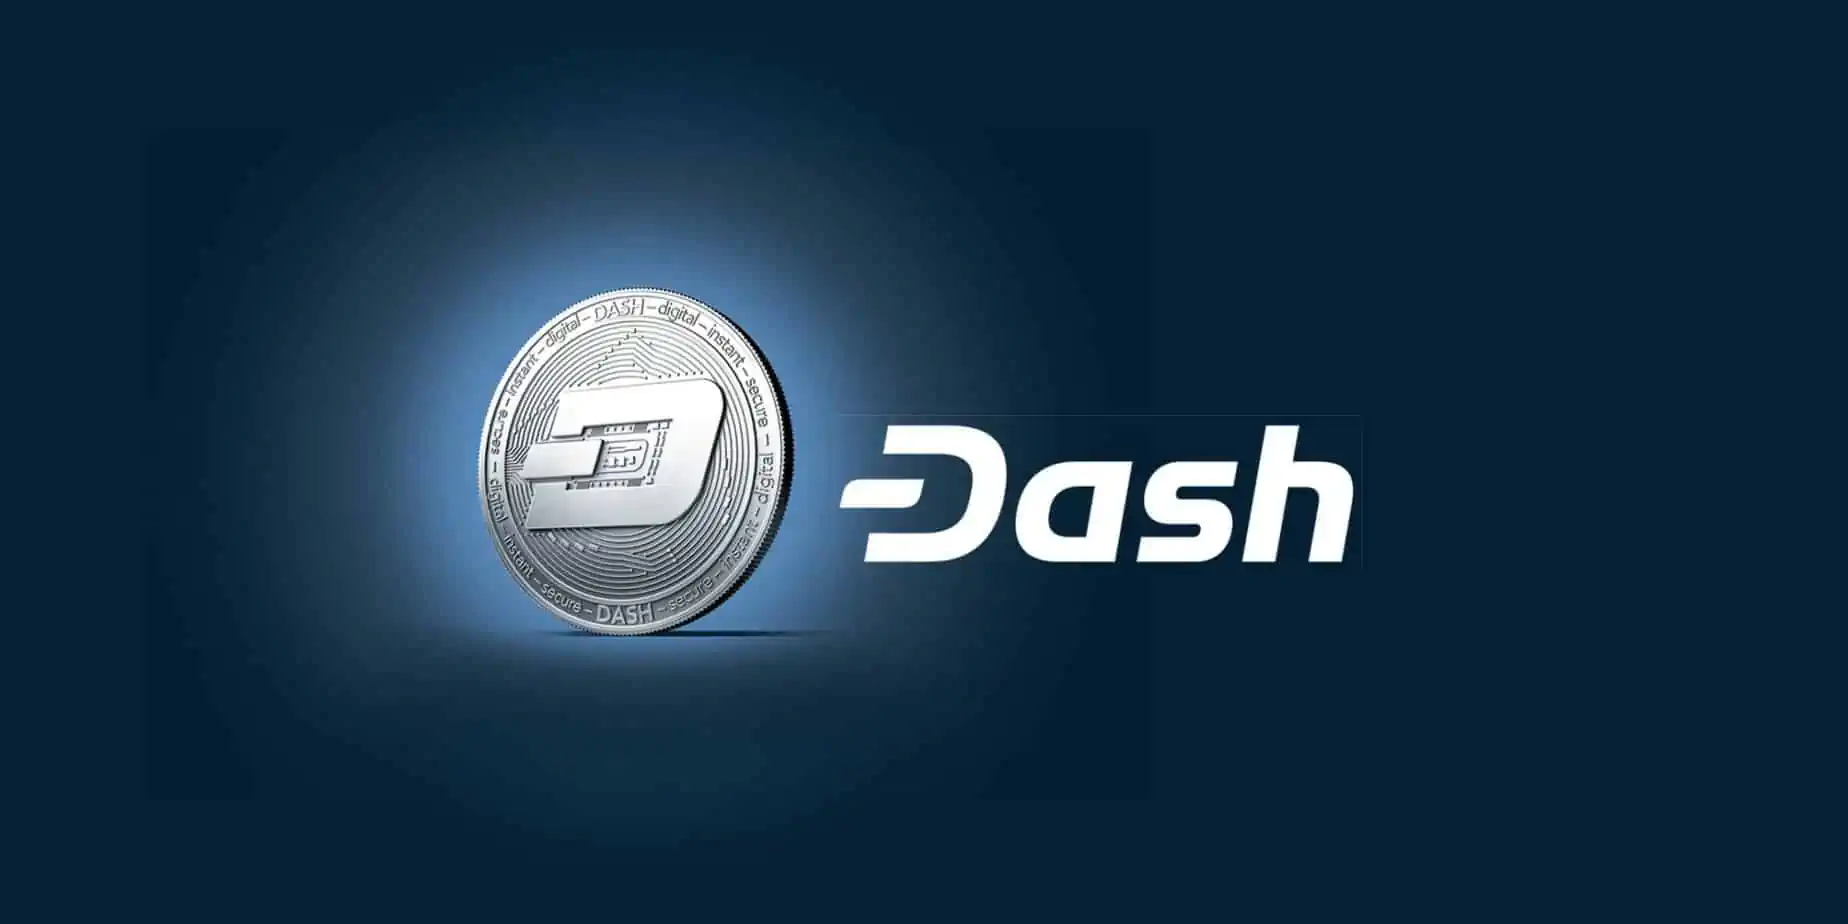 What is Dash